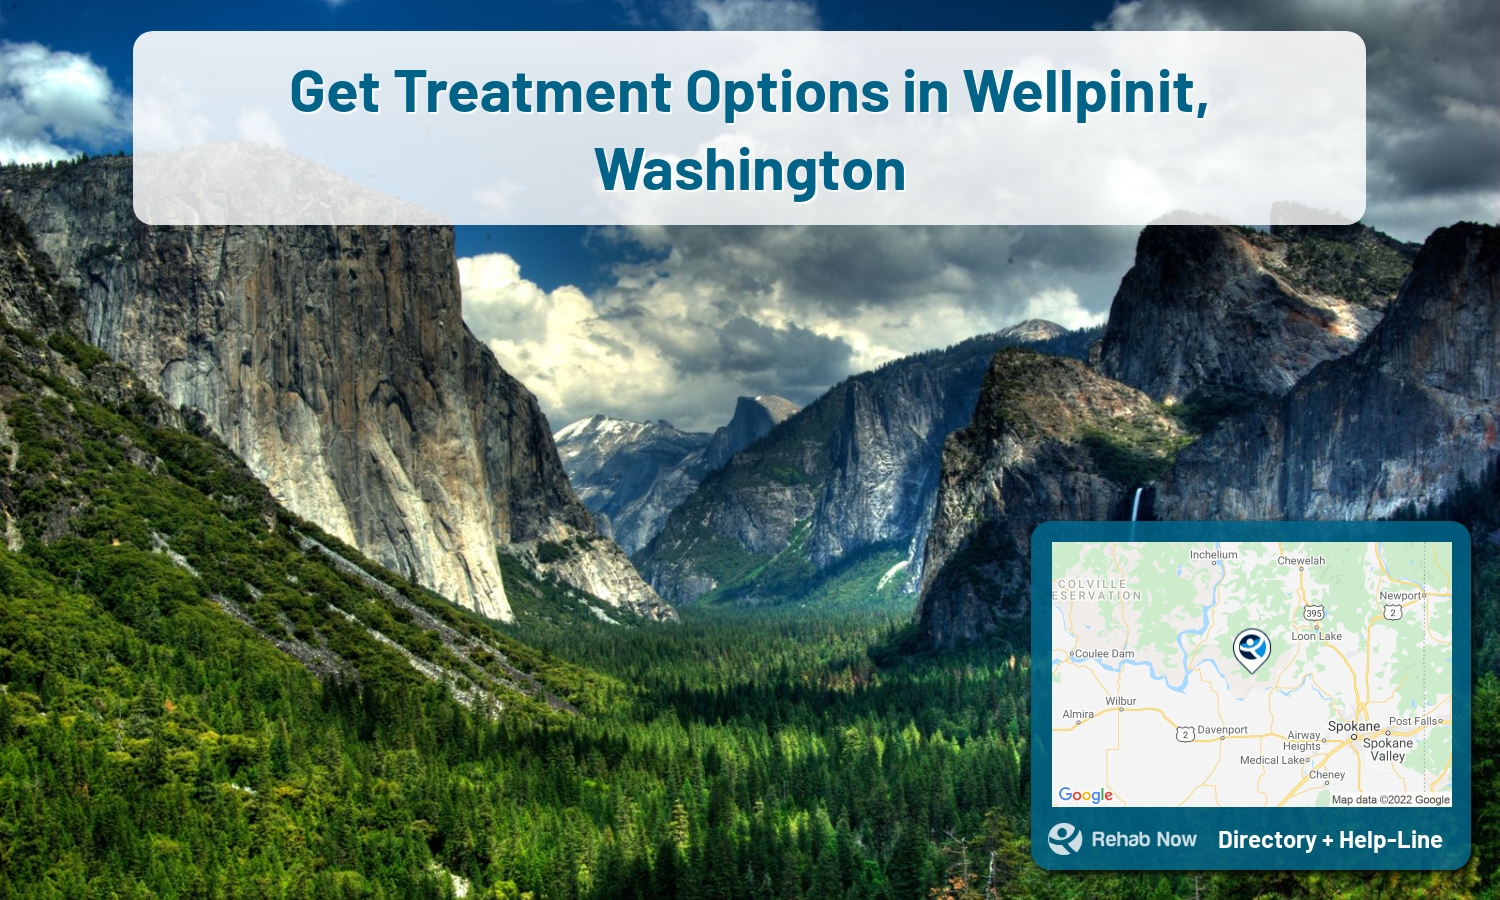 Drug rehab and alcohol treatment services near you in Wellpinit, Washington. Need help choosing a center? Call us, free.